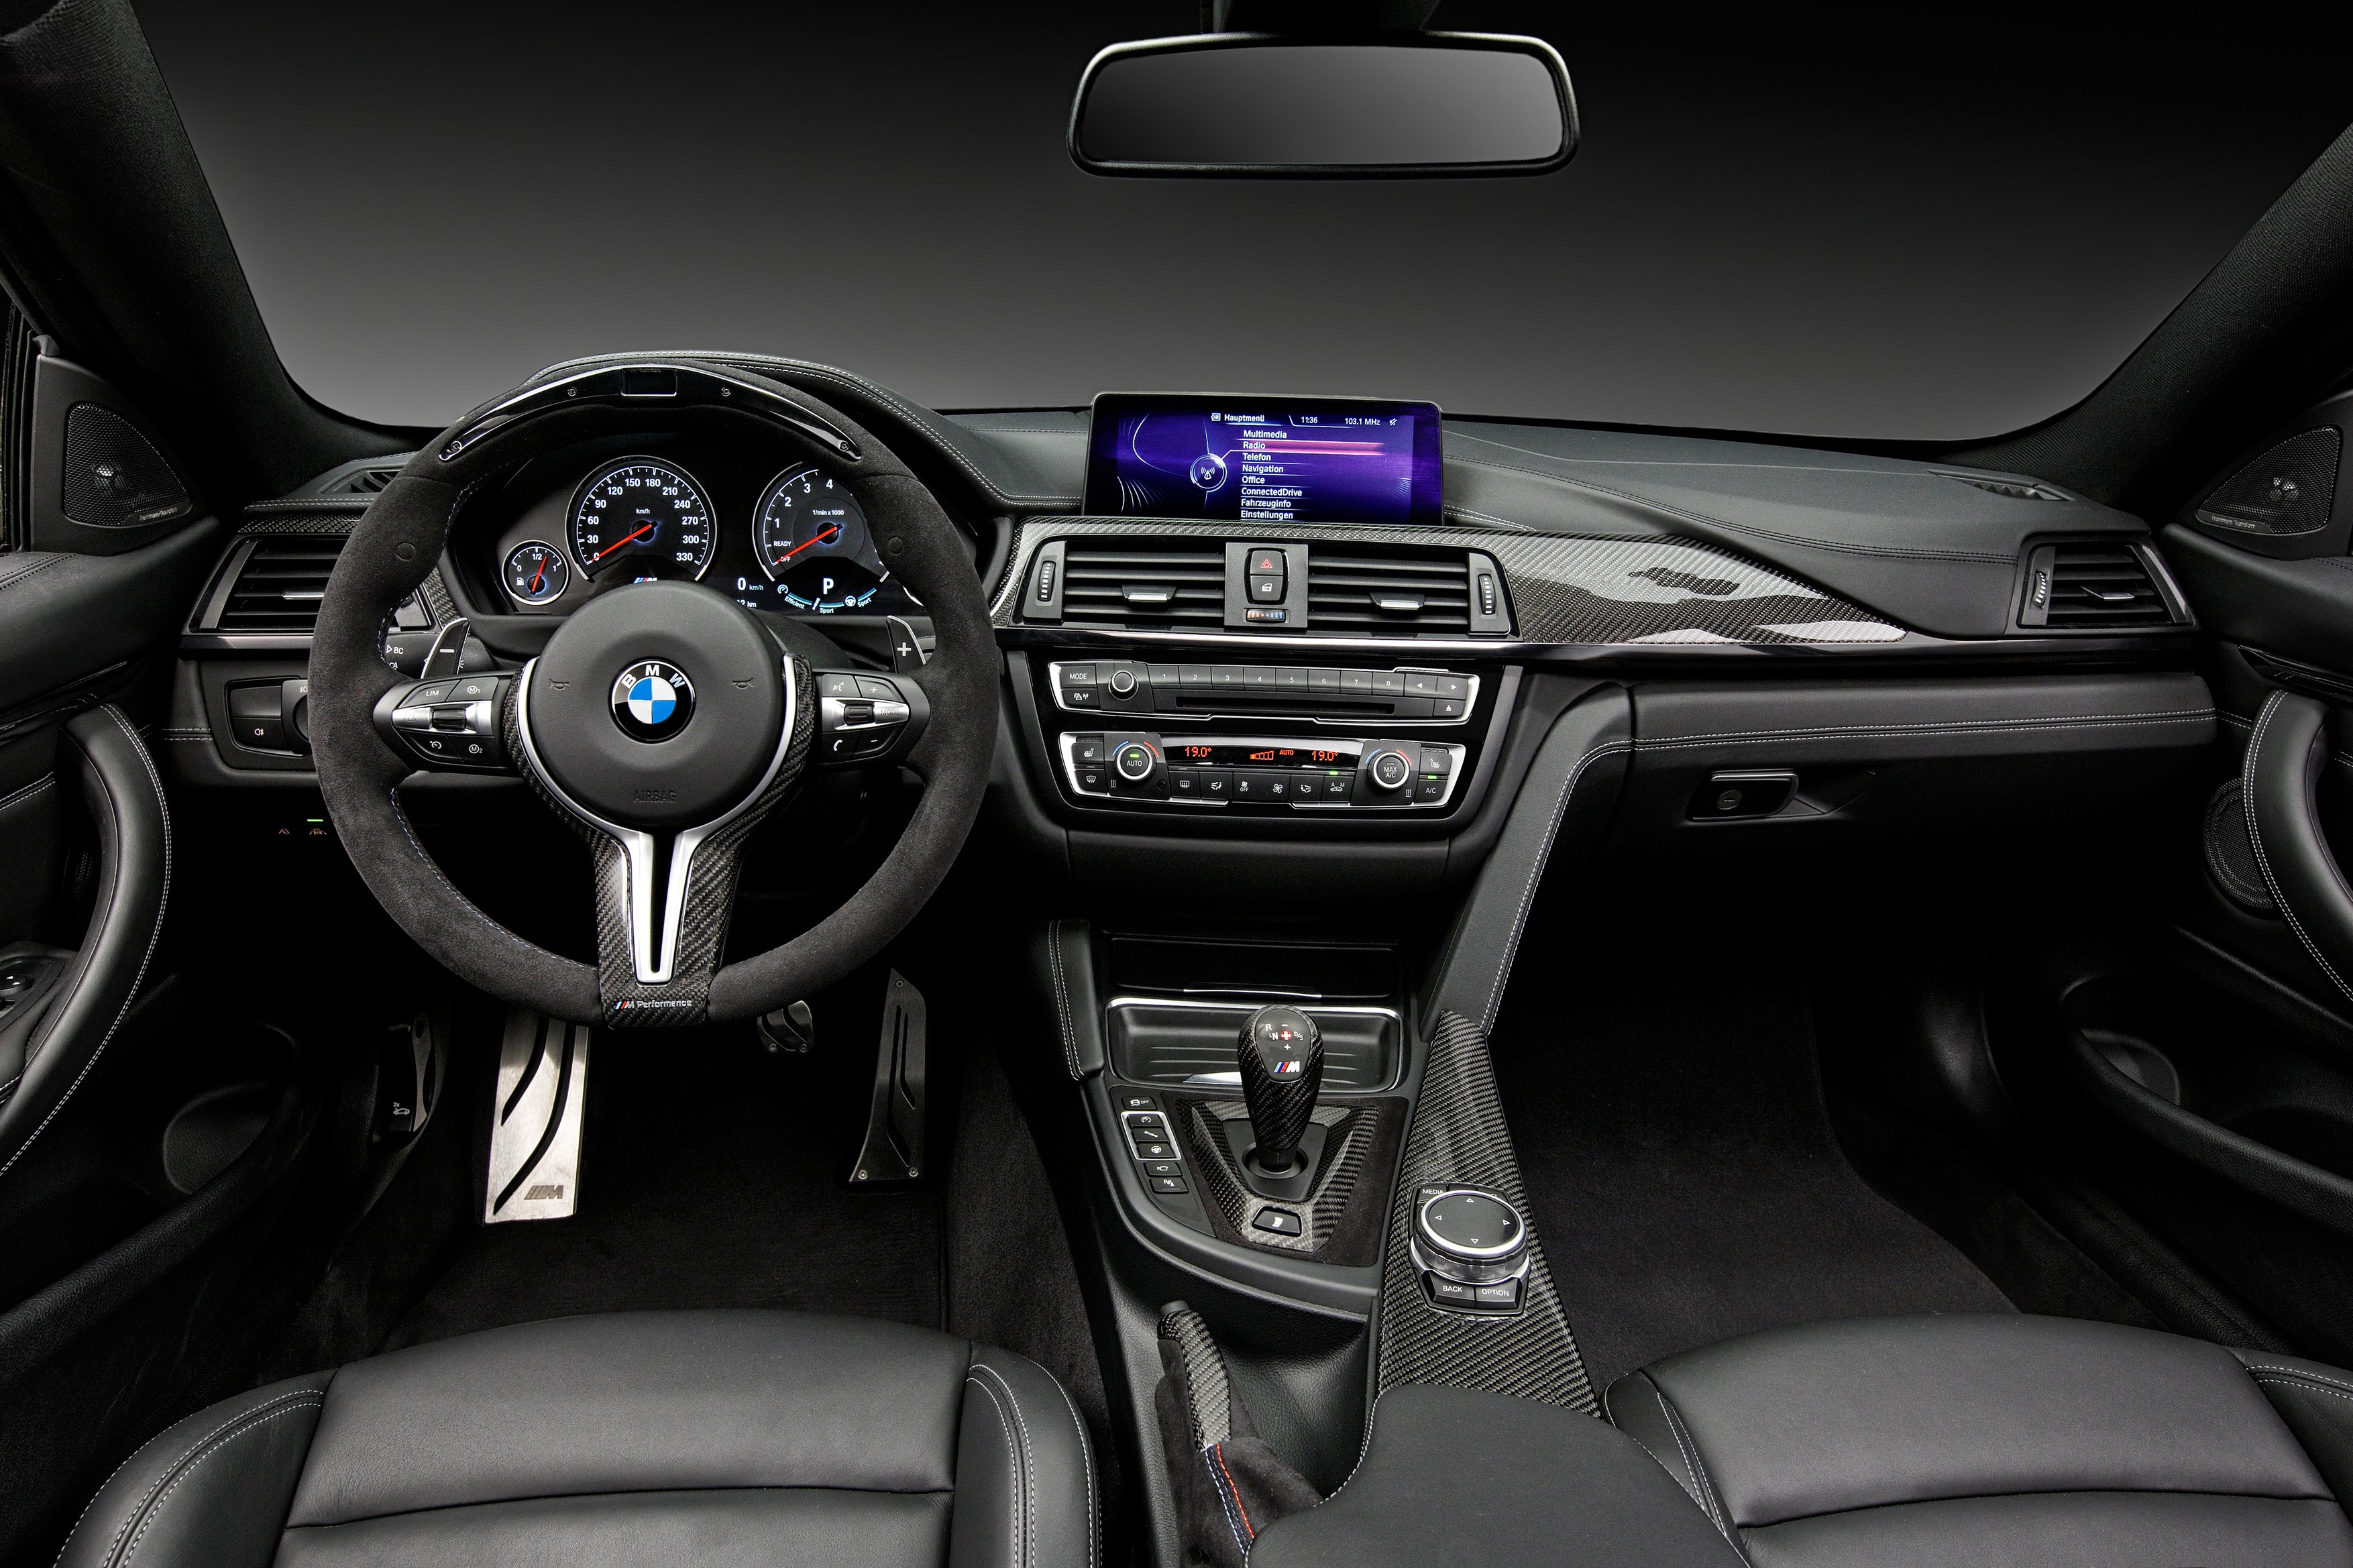 2014, Bmw, M 4, Coupe, M performance,  f82 , Tuning Wallpaper